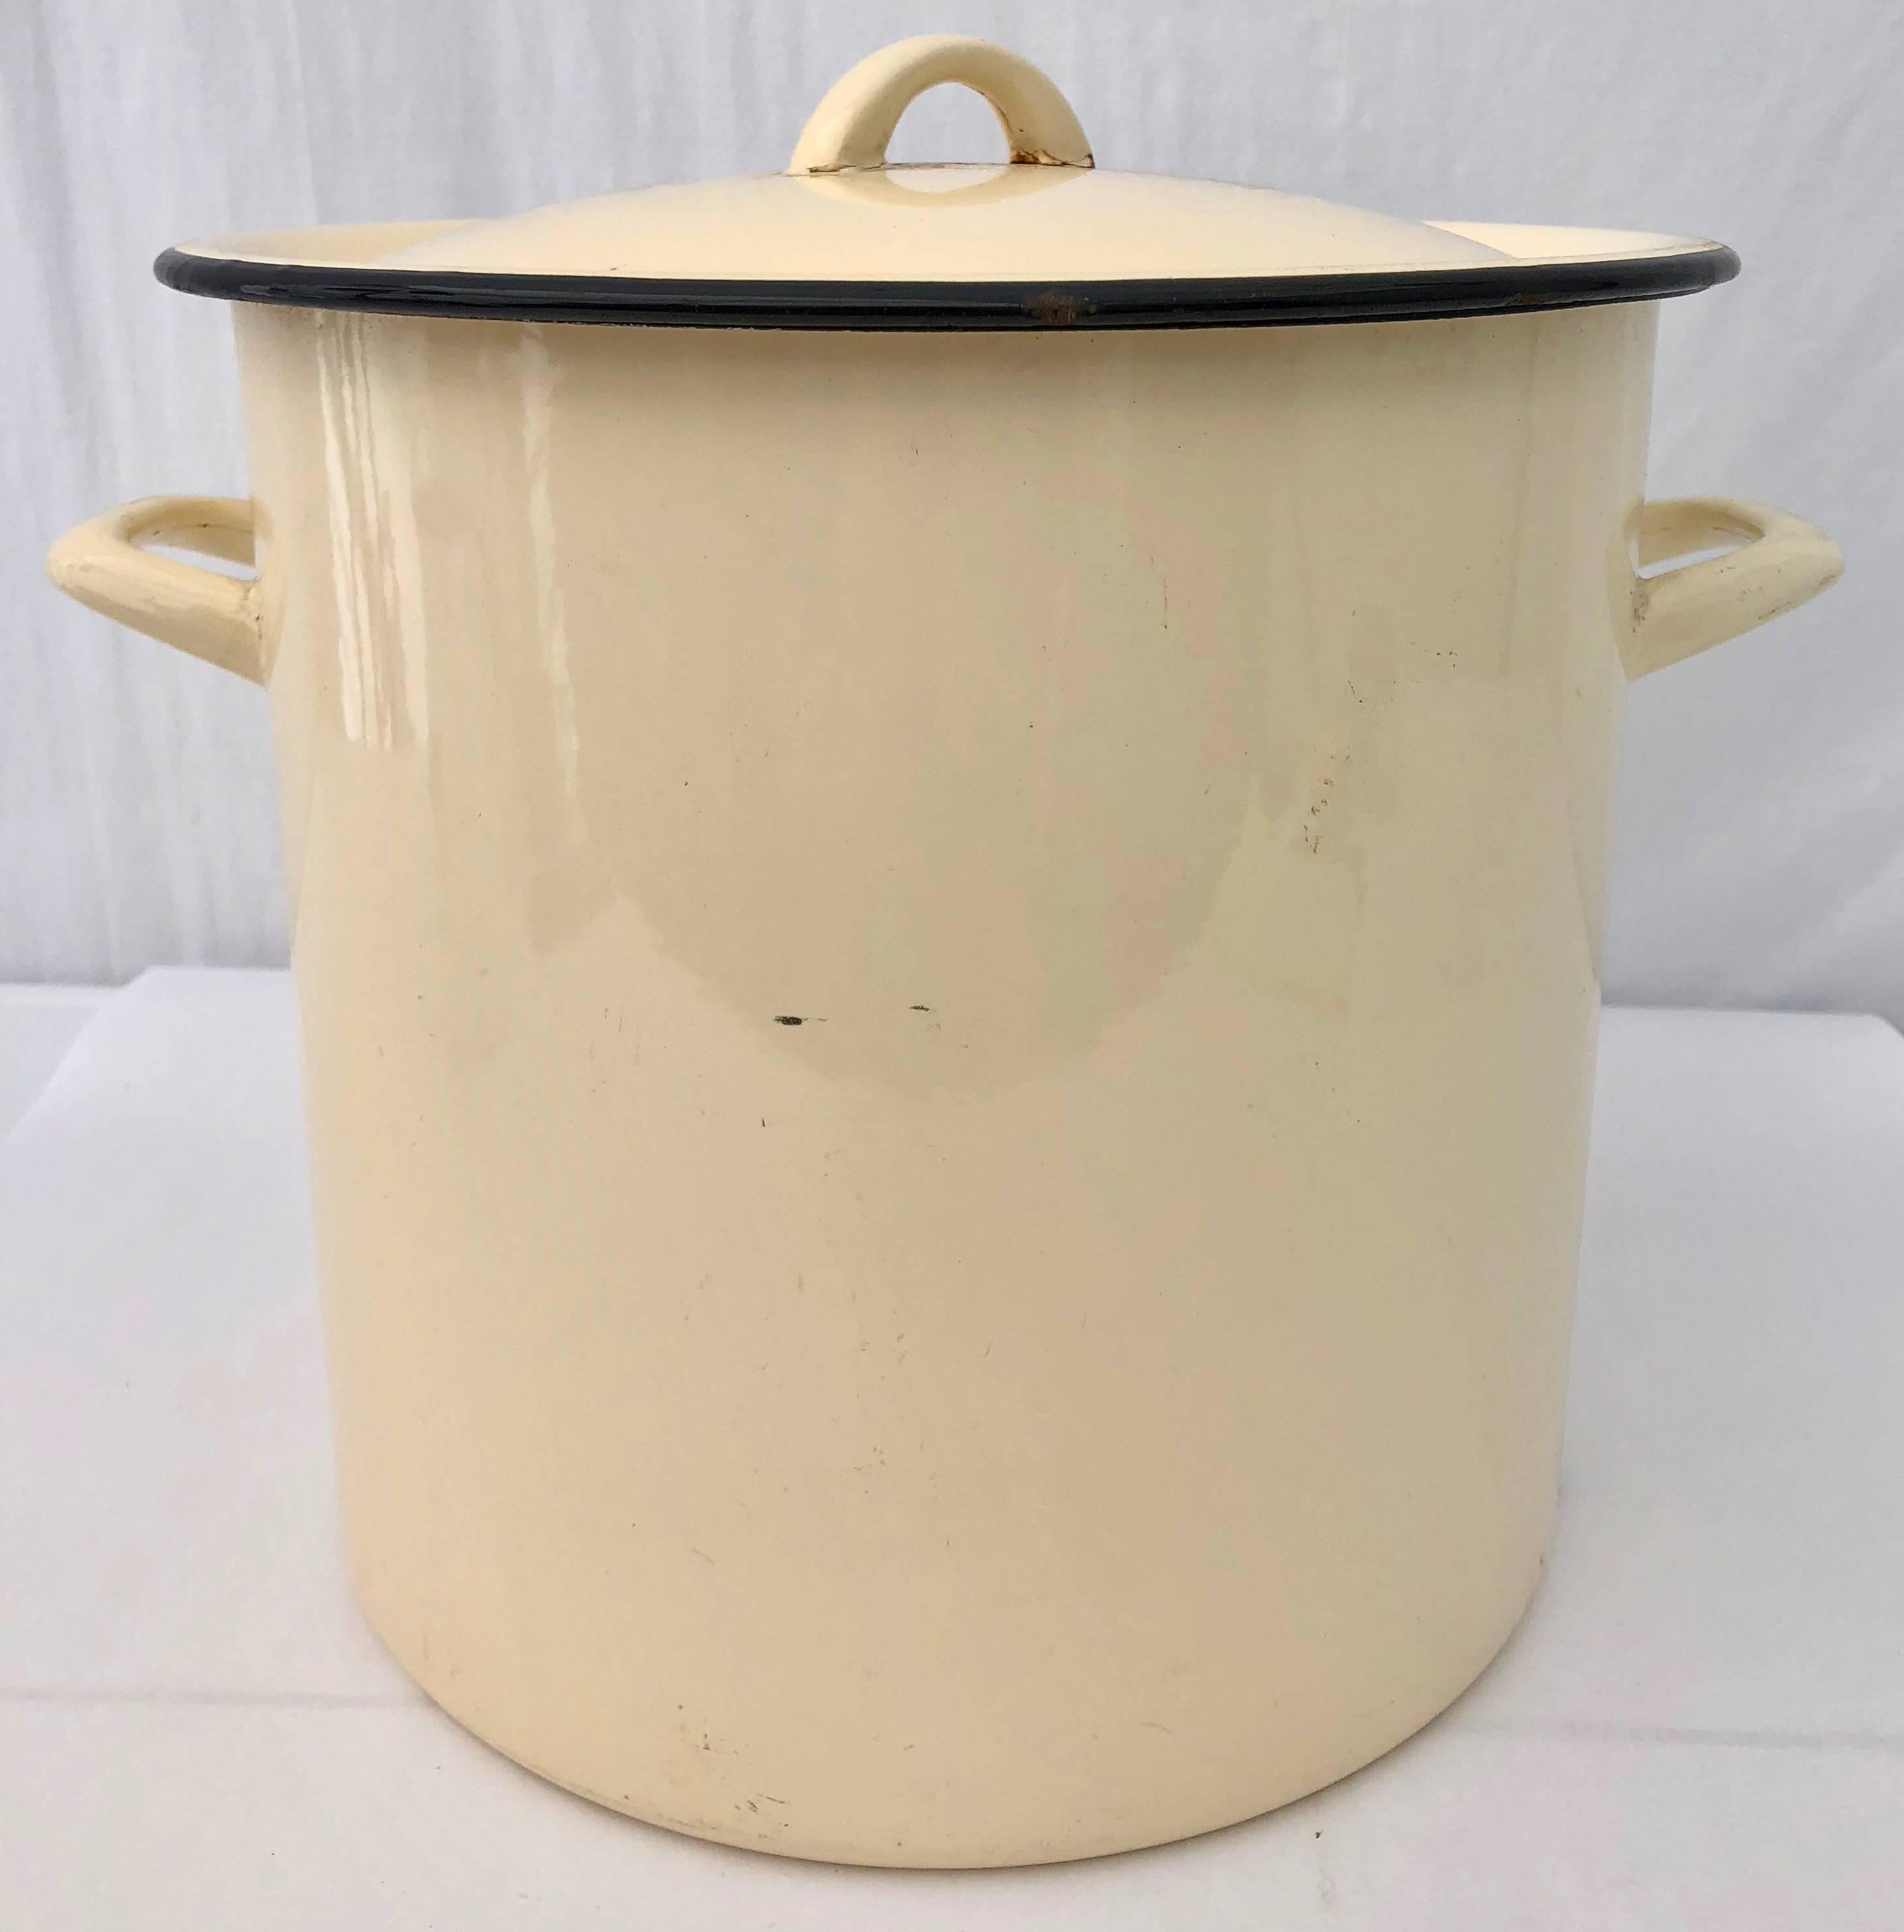 This is a great French enamelware large yellow pot with its original black trimmed lid. It would be beautiful filled with fresh or dried flowers or used in a bathroom to discretely store extra toilet paper or for a party, filled with ice to chill